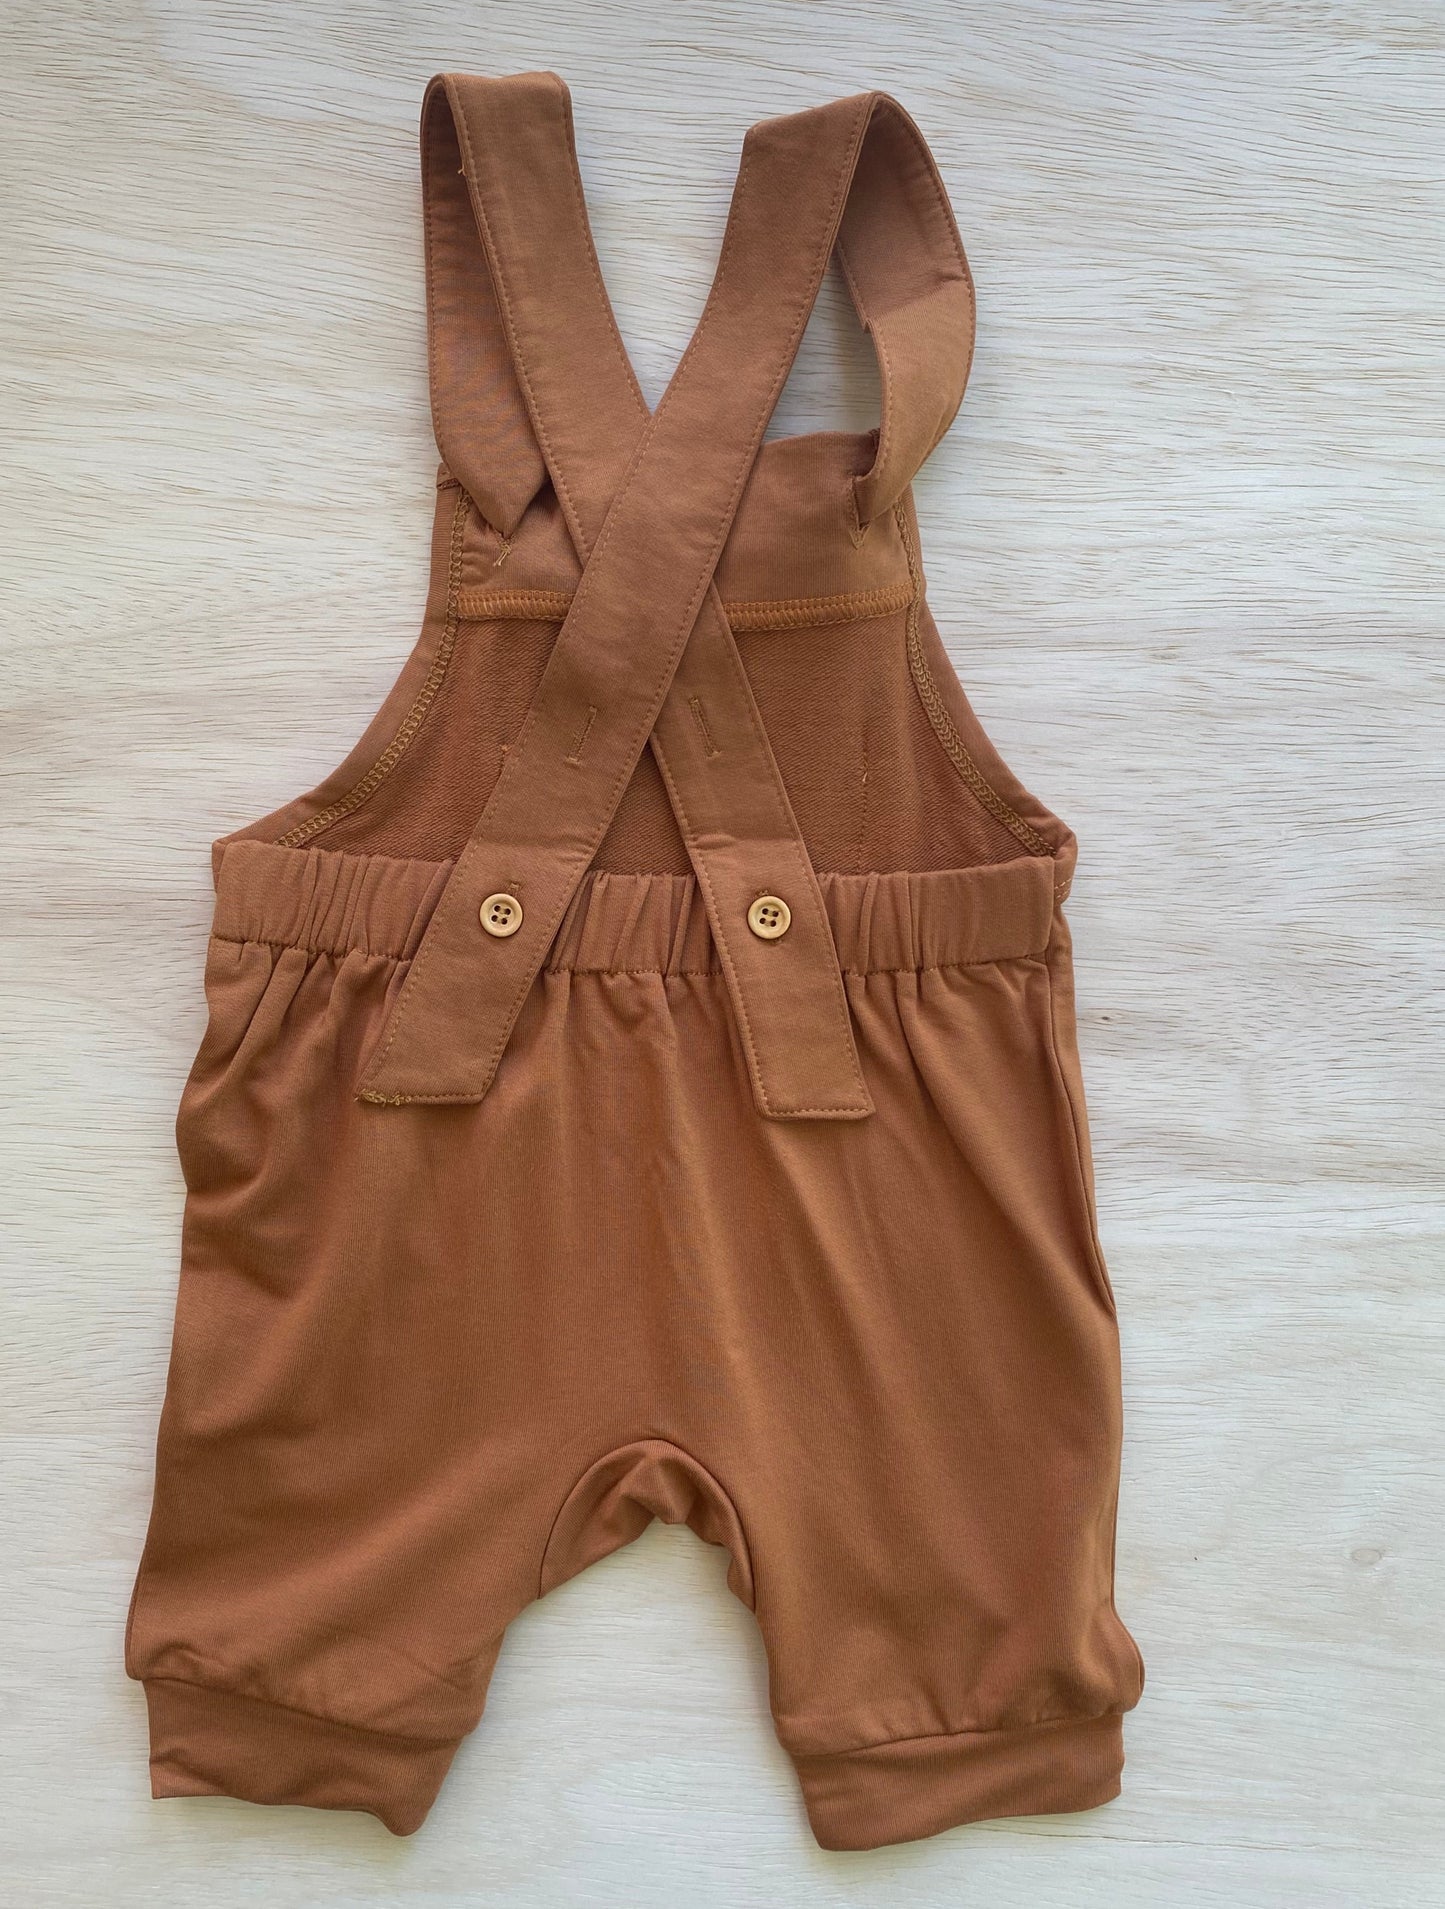 Soft Overall Jumper